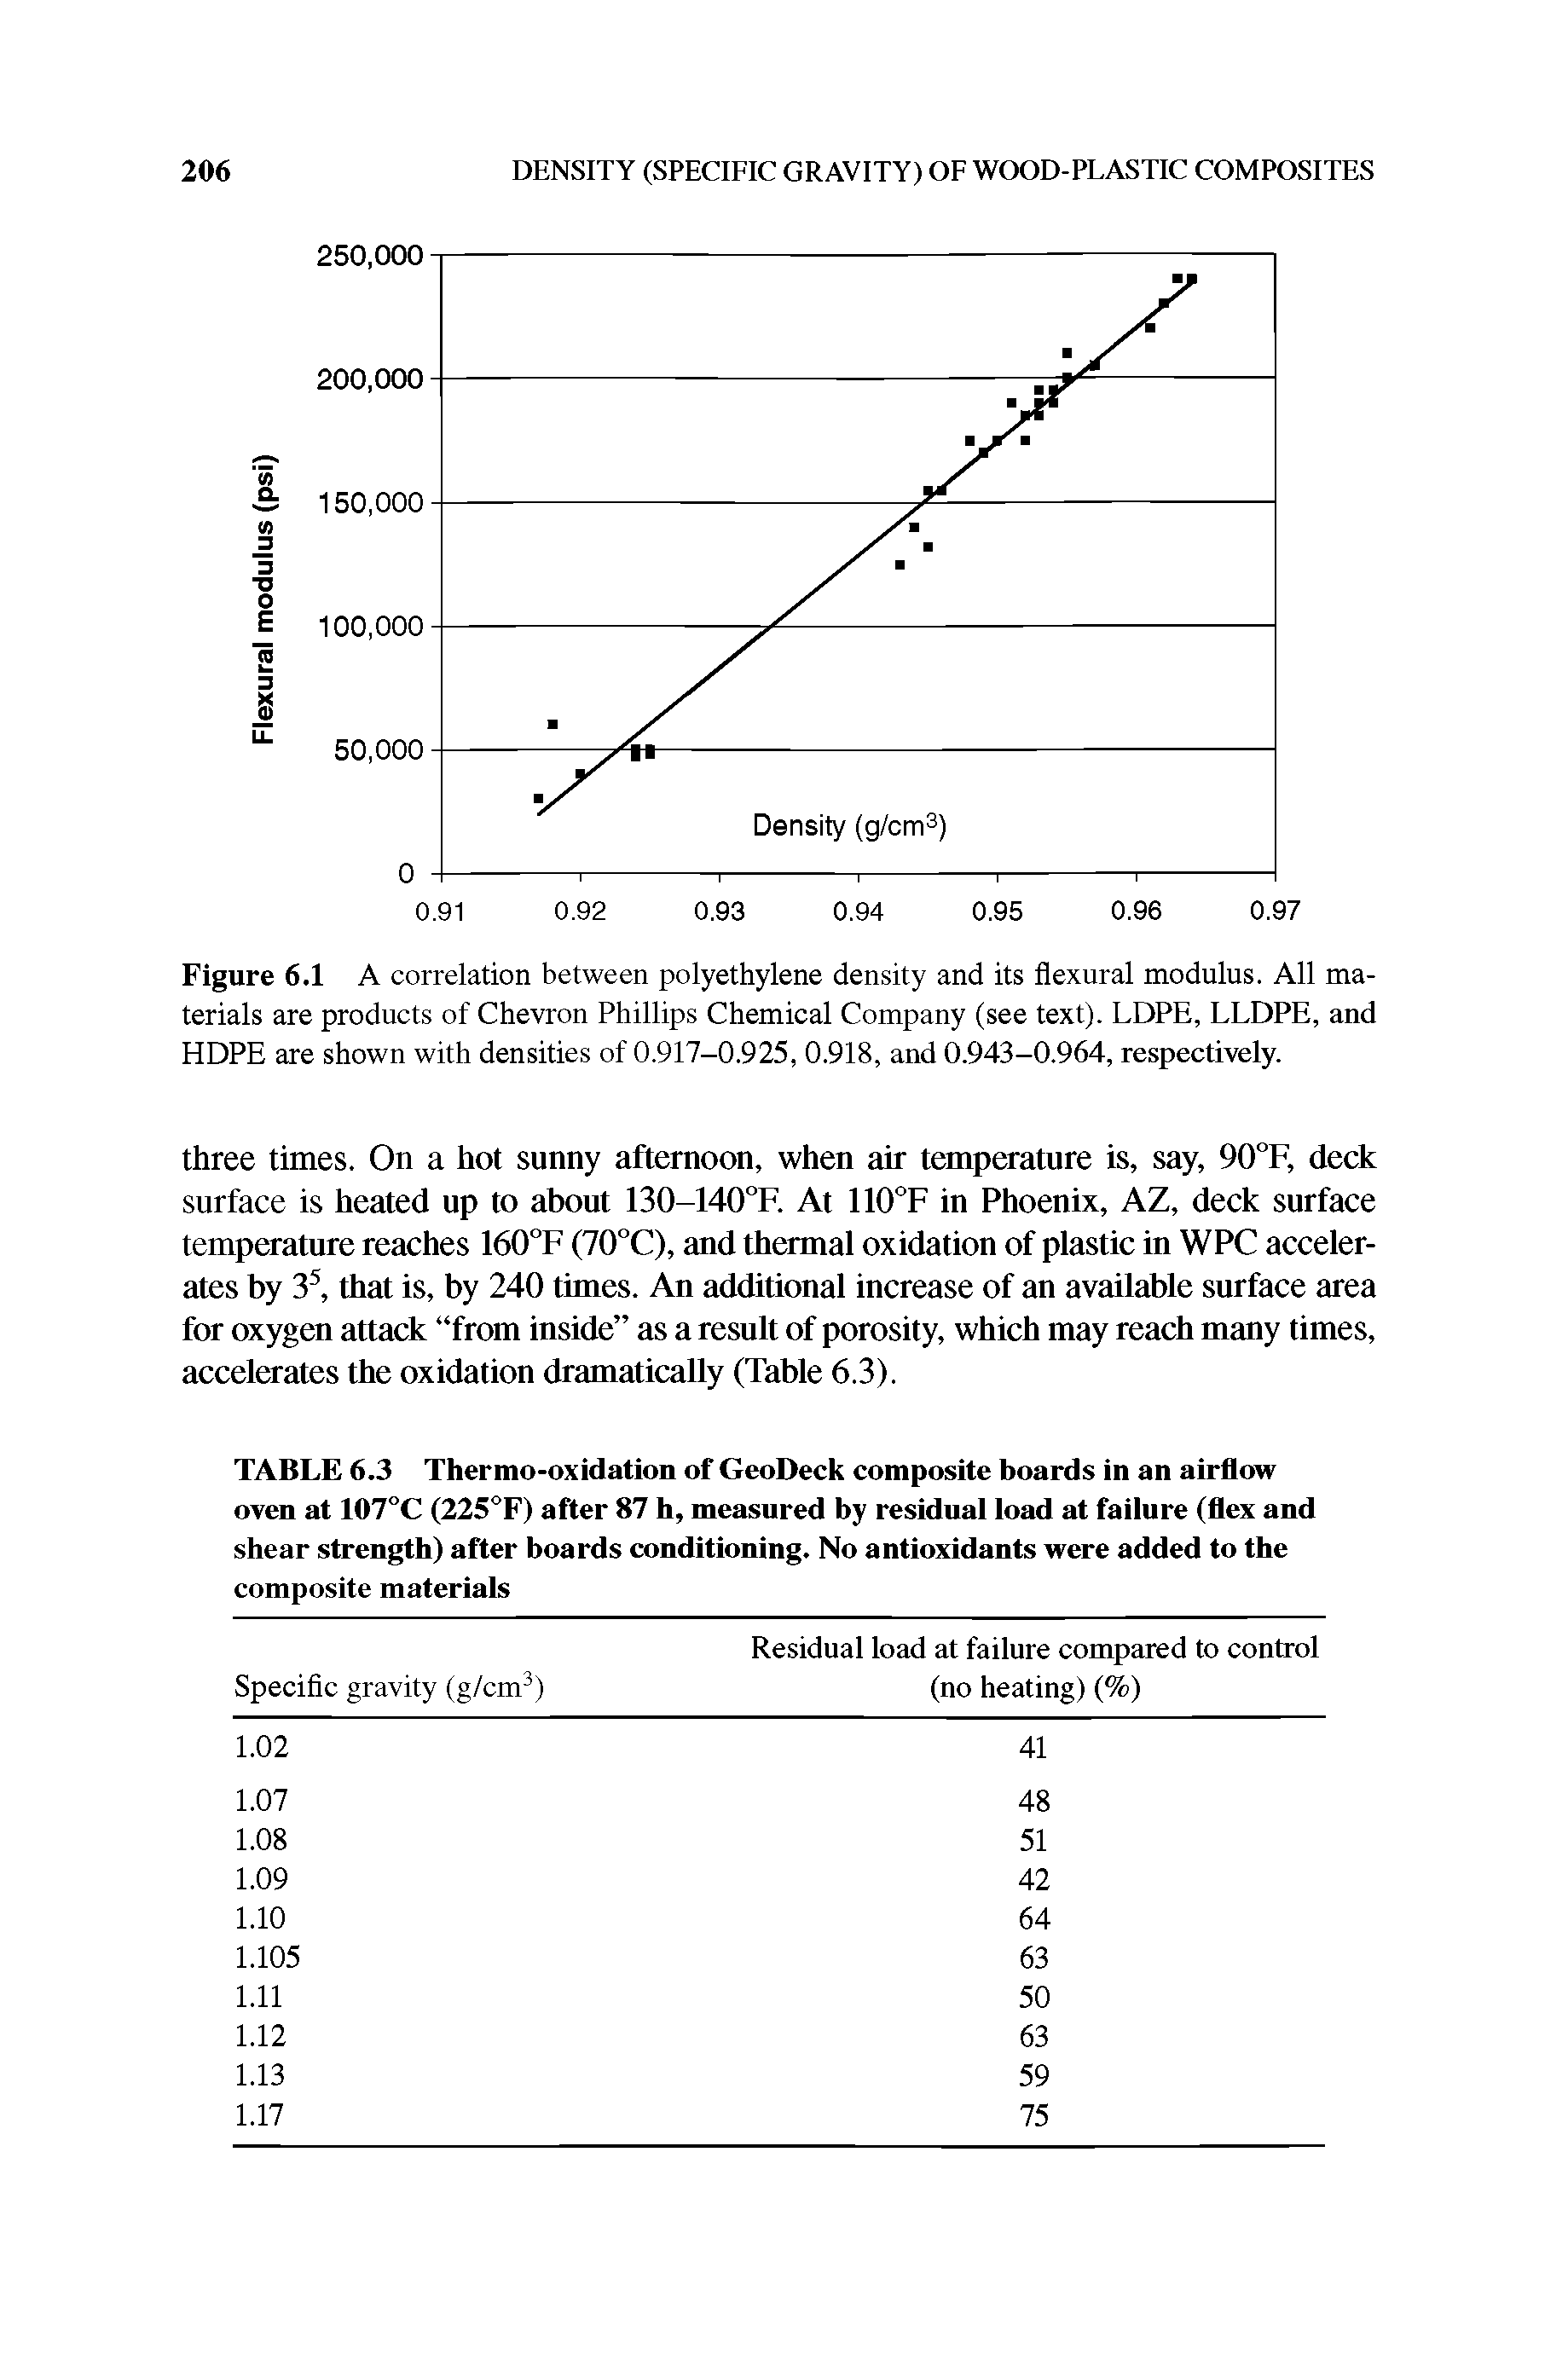 Figure 6.1 A correlation between polyethylene density and its flexural modulus. All materials are products of Chevron Phillips Chemical Company (see text). LDPE, LLDPE, and HDPE are shown with densities of 0.917-0.925, 0.918, and 0.943-0.964, respectively.